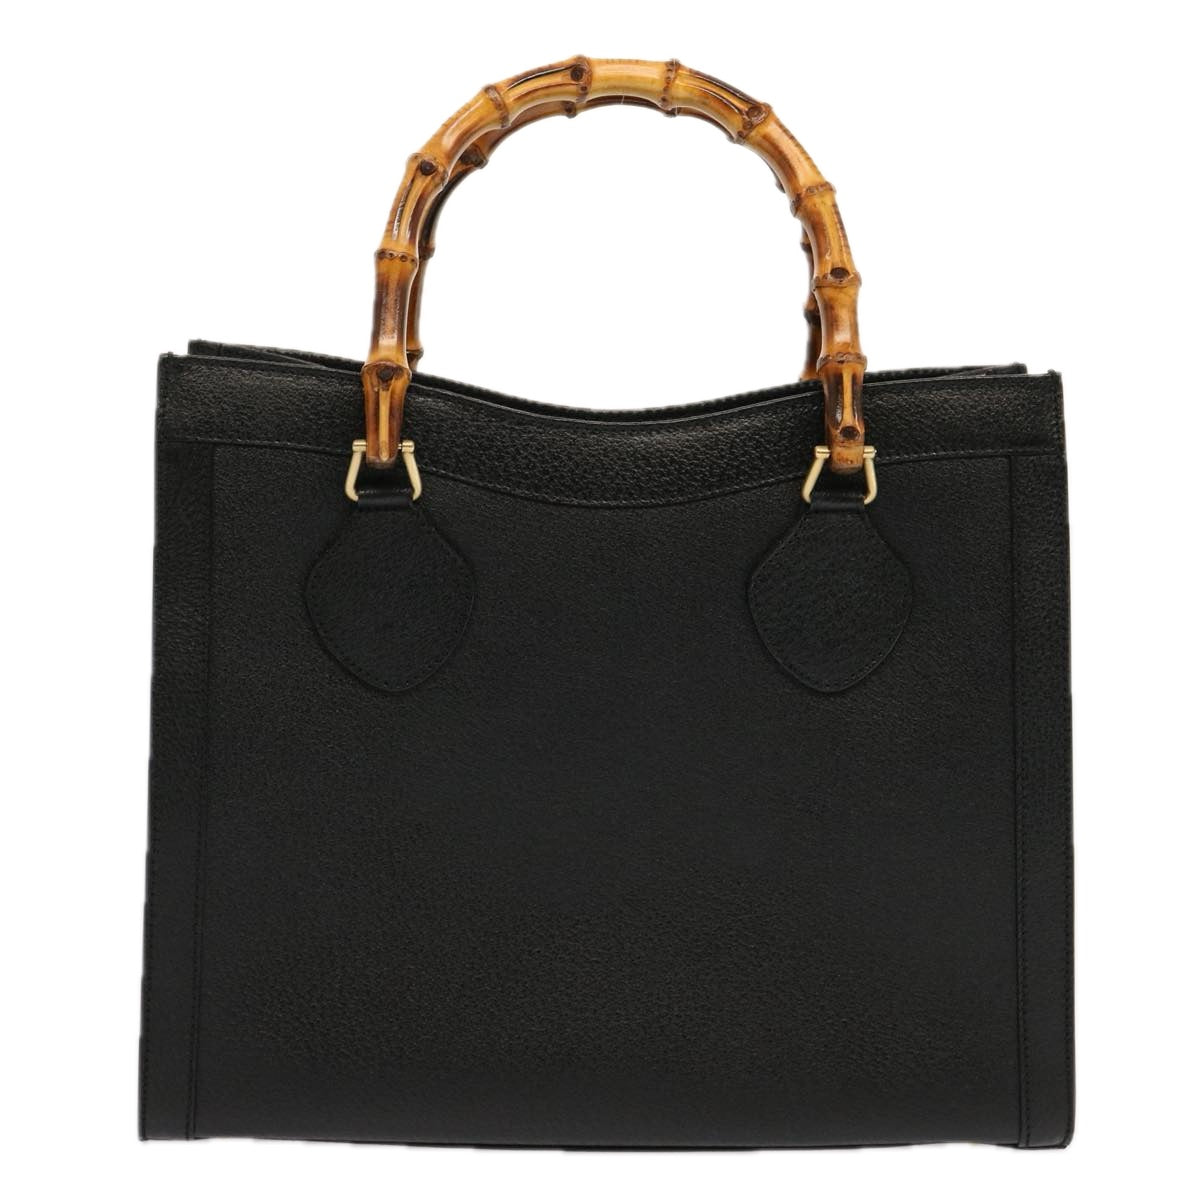 GUCCI Bamboo Tote Bag Leather Black 002 1095 0260 Auth ep3725